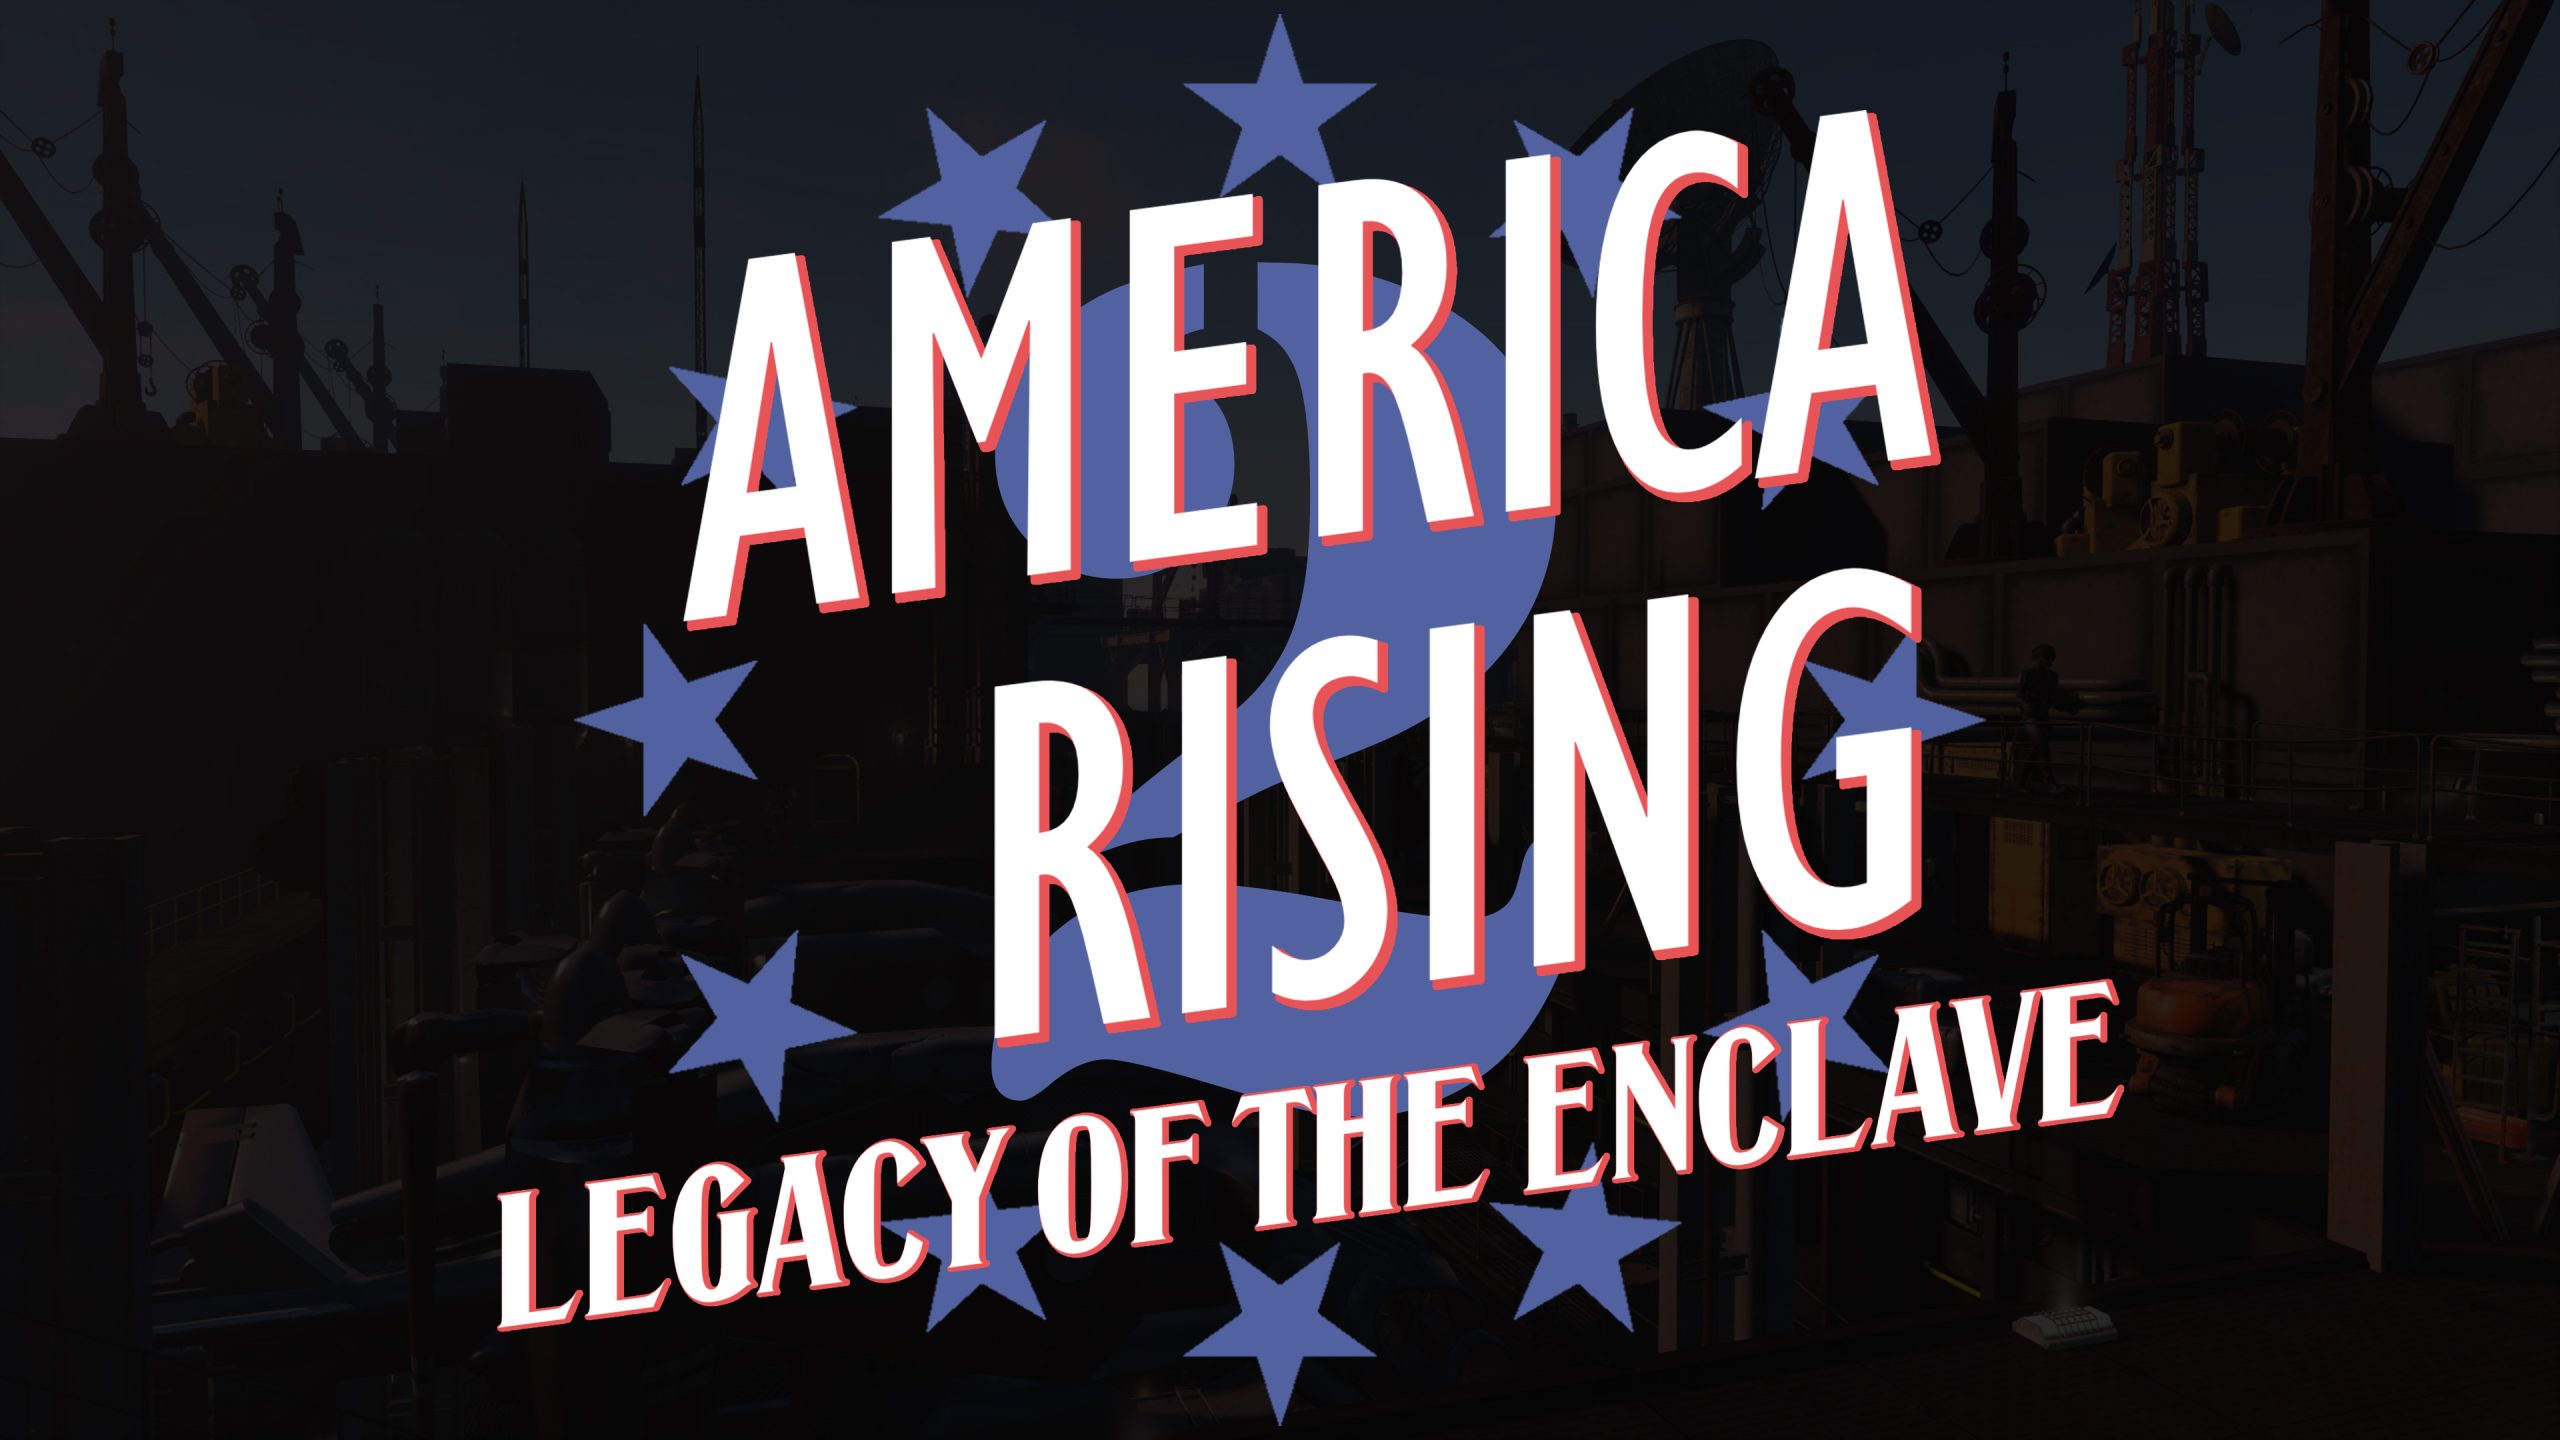 Casting Call for America Rising 2 – Legacy of the Enclave